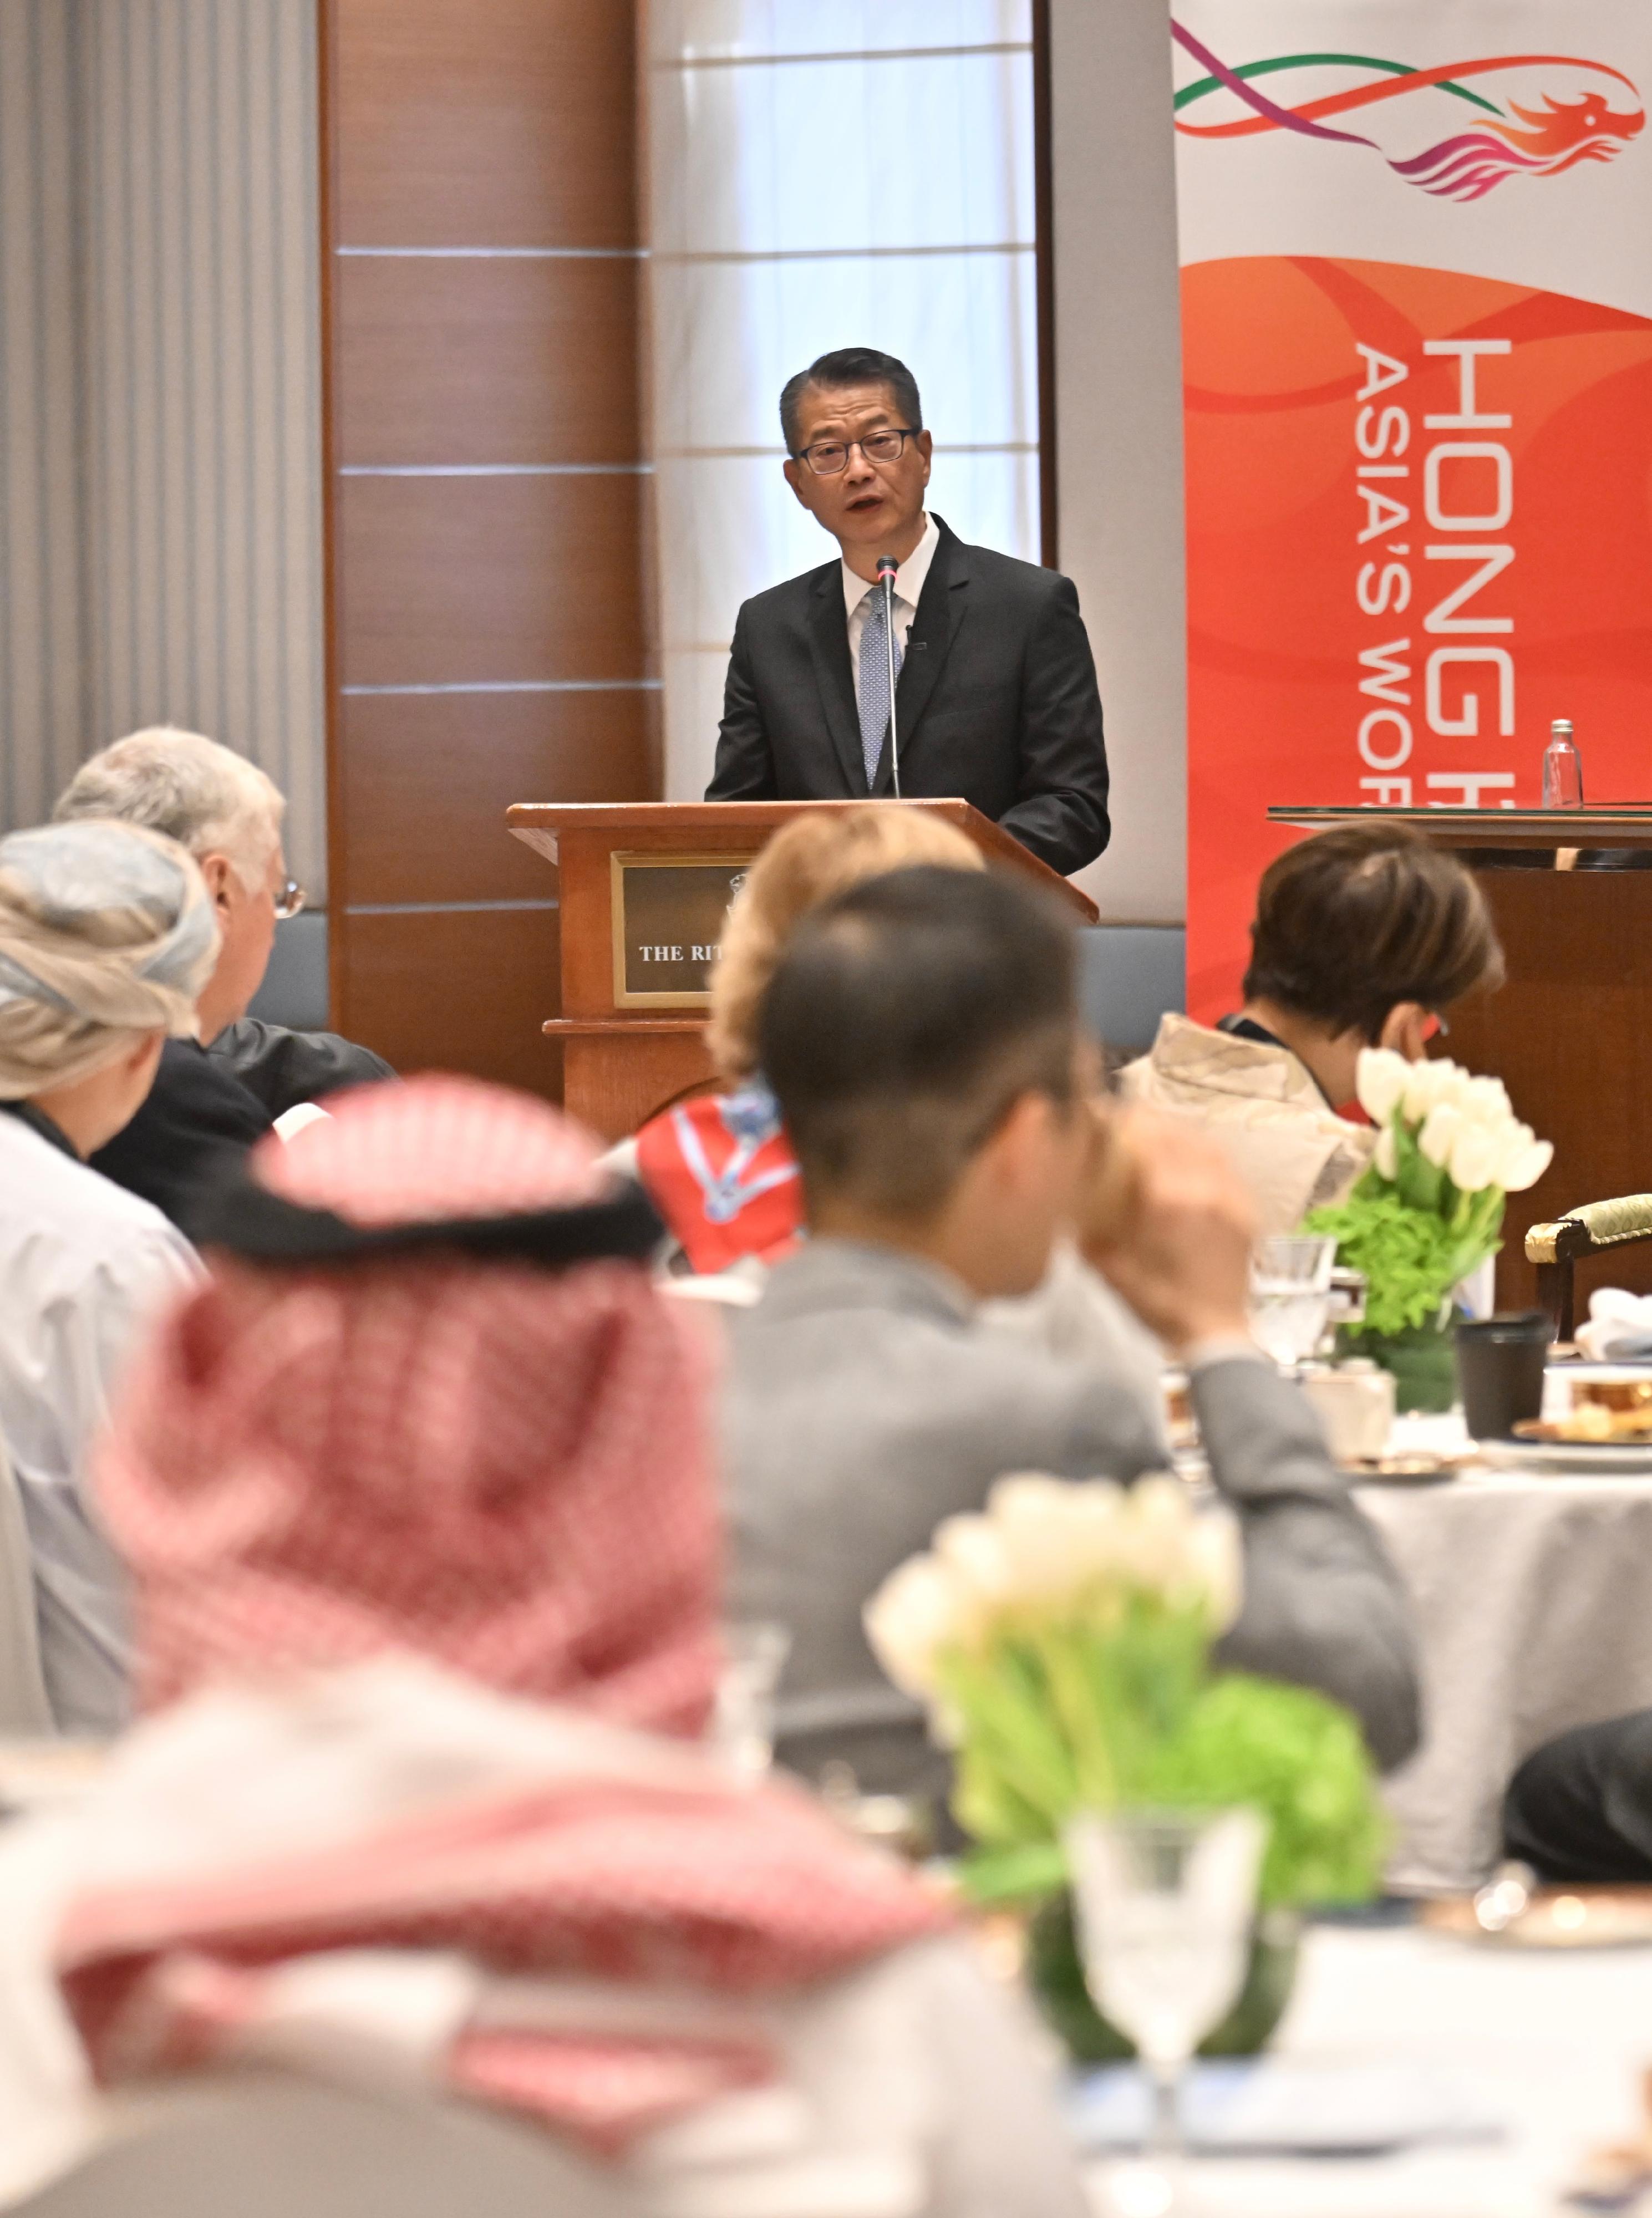 The Financial Secretary, Mr Paul Chan, is continuing his visit to Riyadh, Saudi Arabia today (October 26, Saudi Arabia time). Mr Chan attended a breakfast seminar jointly organised by the Hong Kong Economic and Trade Office in Dubai and the Hong Kong Exchanges and Clearing Limited. Speaking to some 50 political and business leaders, he said that with the advantages under the “one country, two systems” principle, the financial markets and services will continue to broaden and develop, and bring tremendous opportunities to Middle East enterprises and investors.  He encouraged enterprises in the region to tap into Hong Kong’s financial markets and services and reach out to the Mainland market.